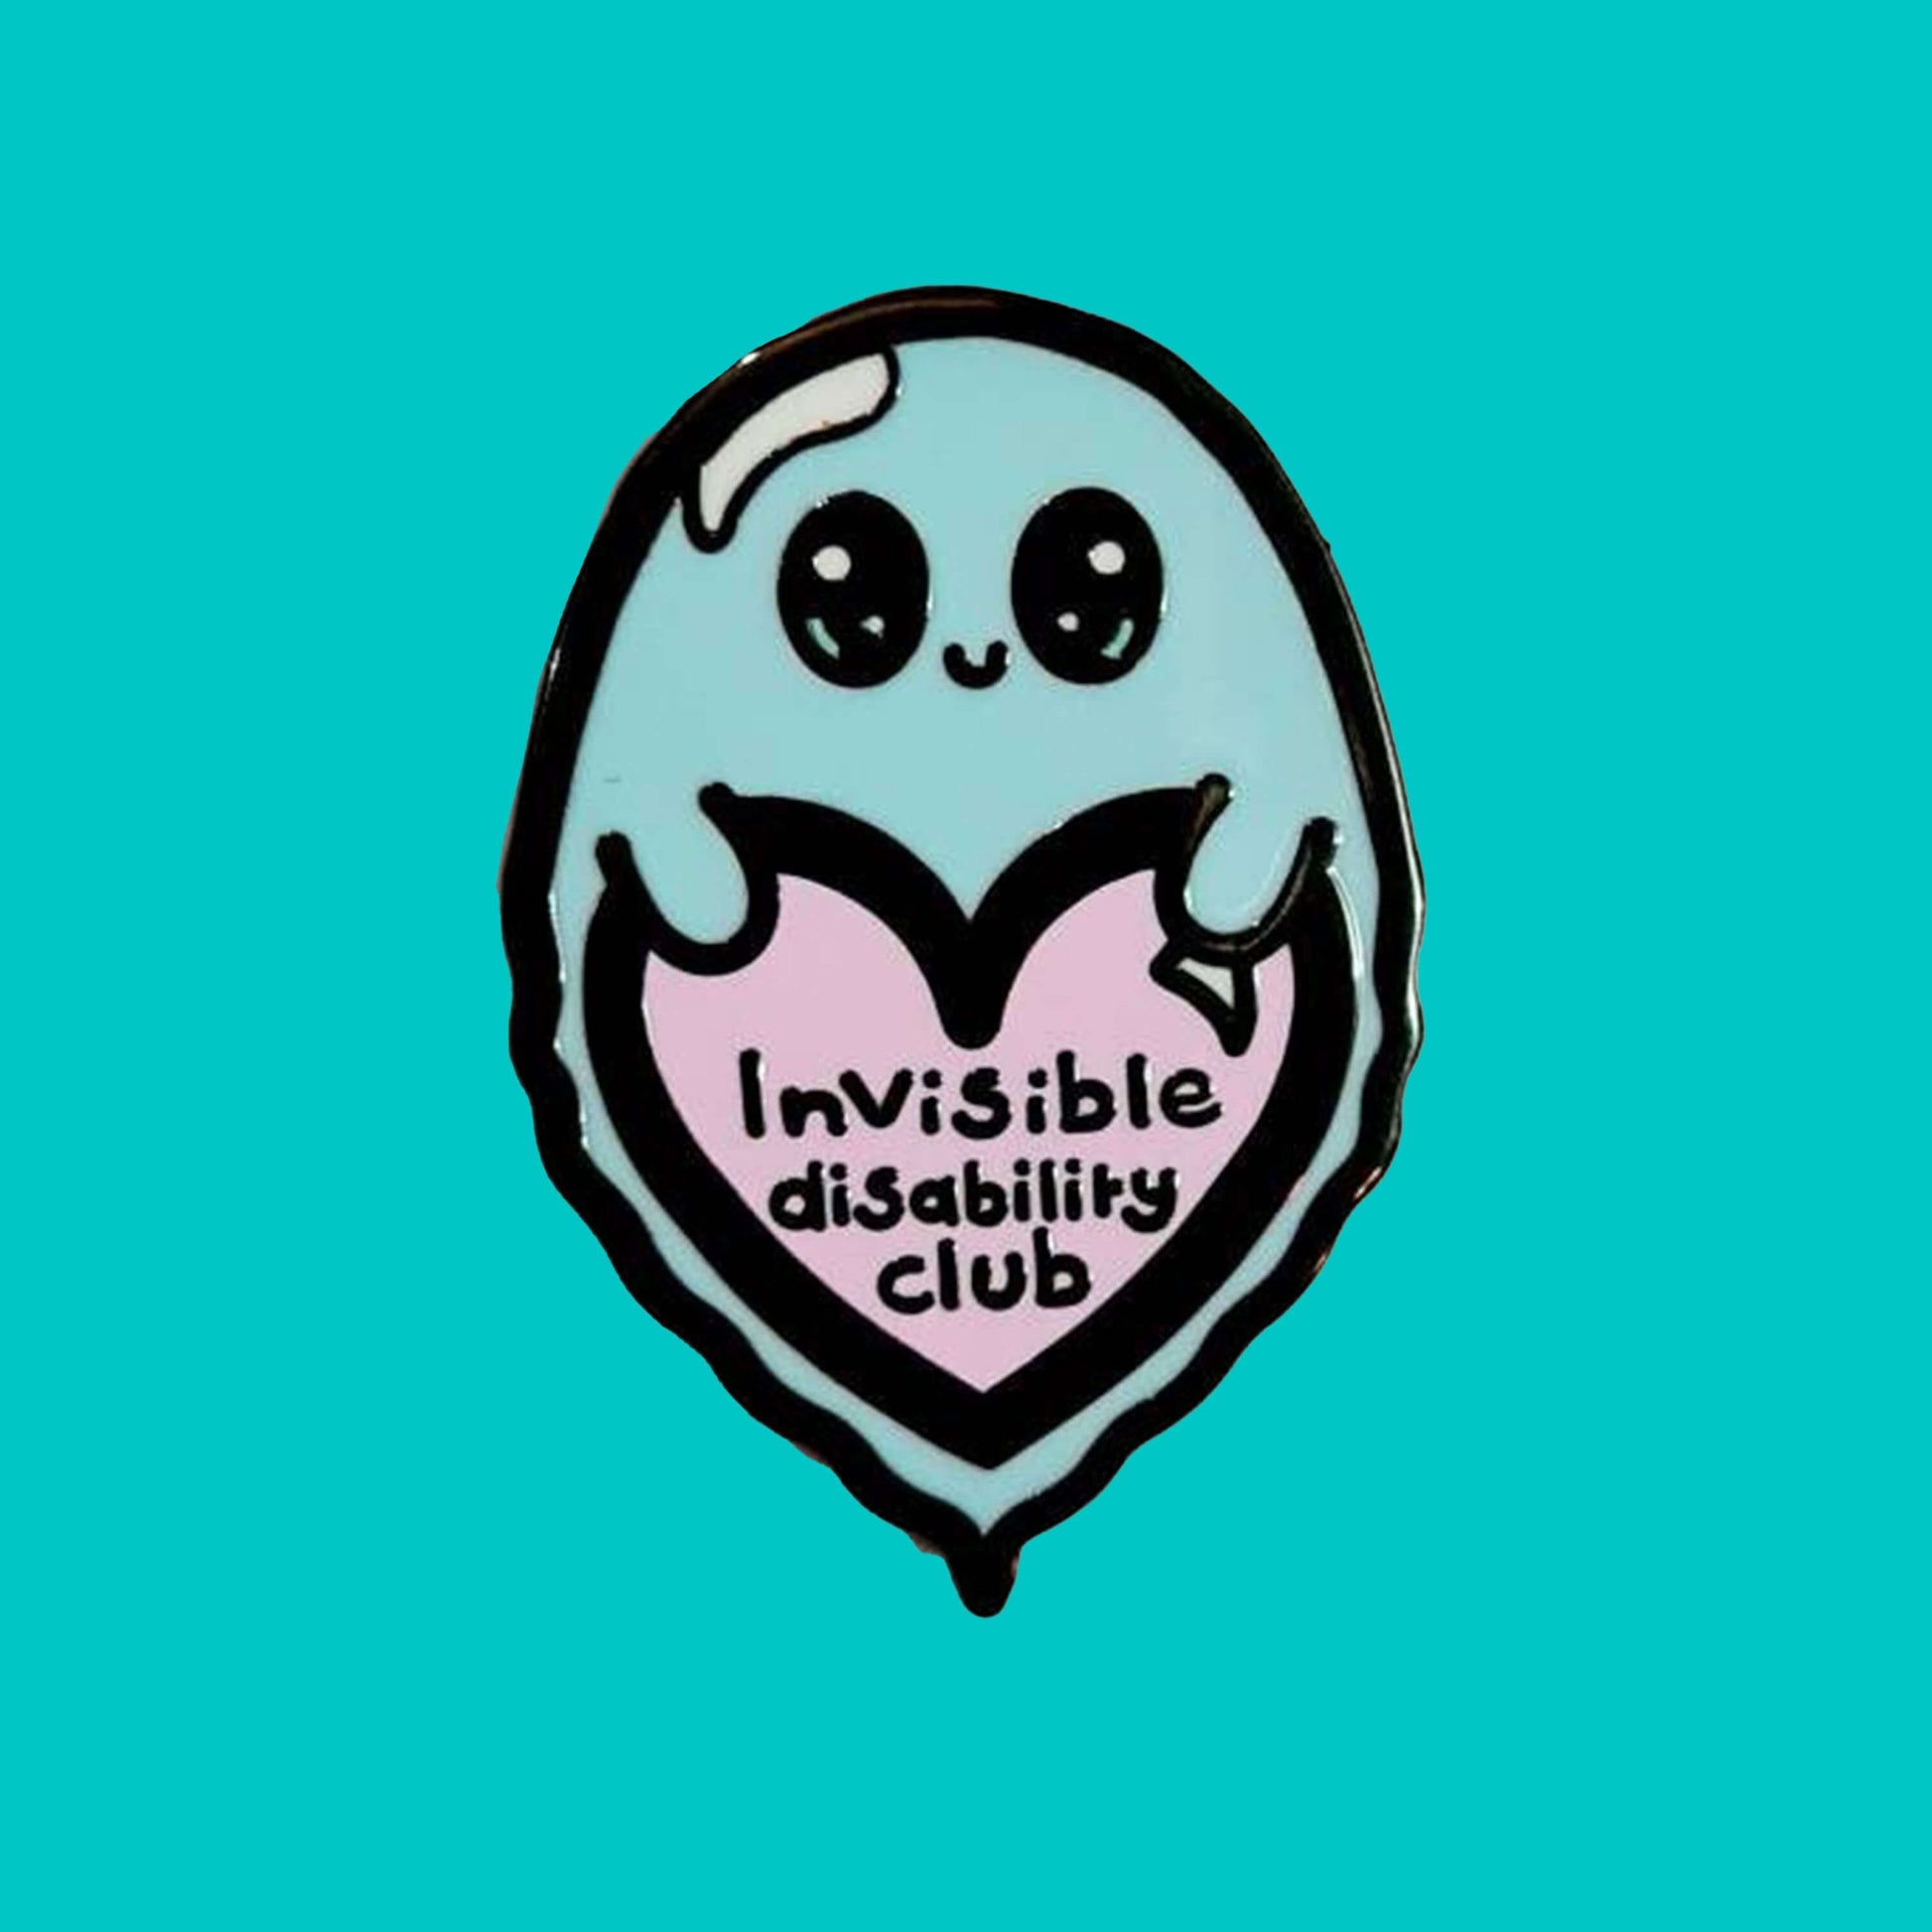 Invisible Disability Club Enamel Pin shown on a blue background. The enamel pin is of a cute smiling ghost holding a pink heart with text saying invisible disability club. The enamel pin is designed to raise awareness for hidden and chronic disabilities